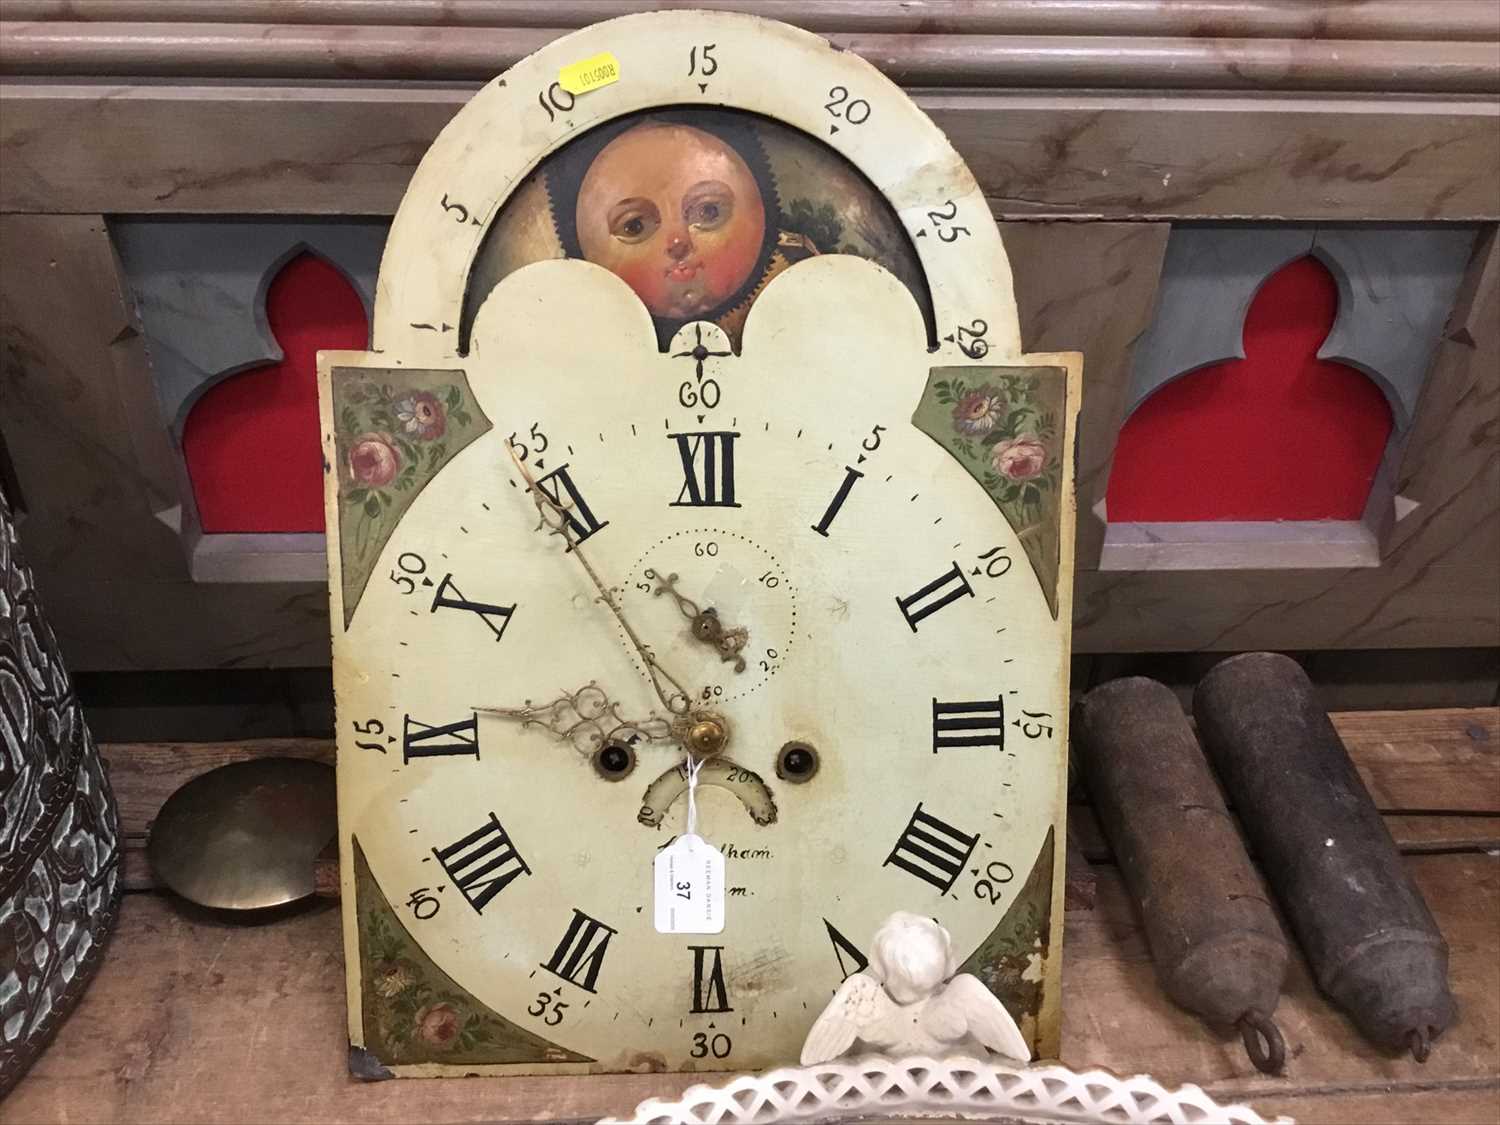 Lot 37 - 19th century longcase clock movement with arched painted dial signed Thomas Hilham, with floral spandrels, two weights and pendulum present